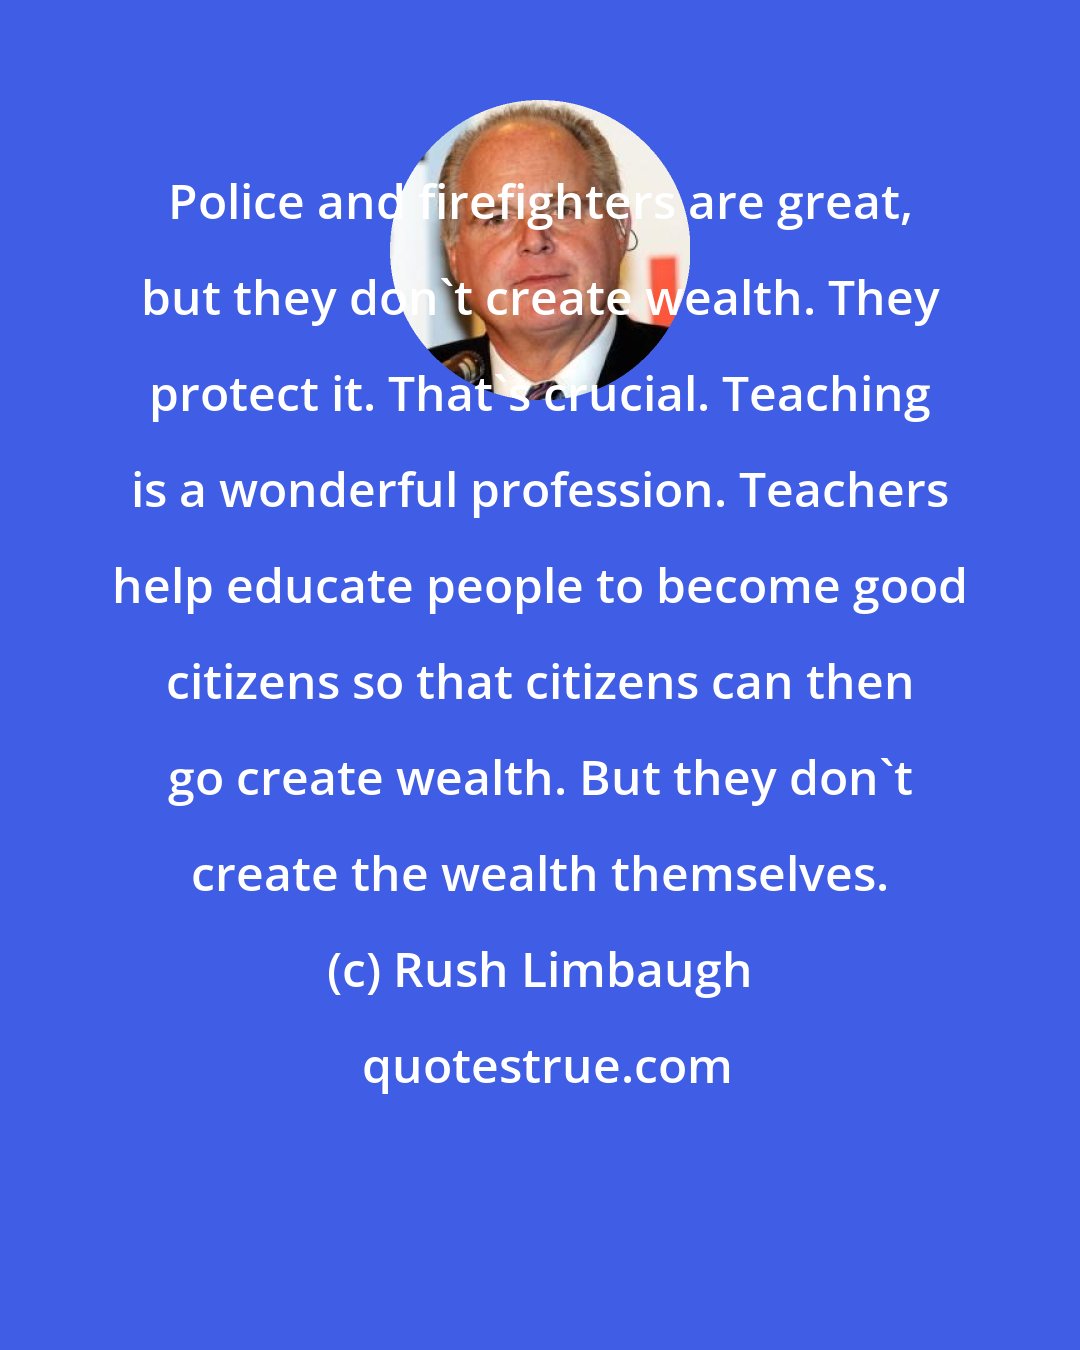 Rush Limbaugh: Police and firefighters are great, but they don't create wealth. They protect it. That's crucial. Teaching is a wonderful profession. Teachers help educate people to become good citizens so that citizens can then go create wealth. But they don't create the wealth themselves.